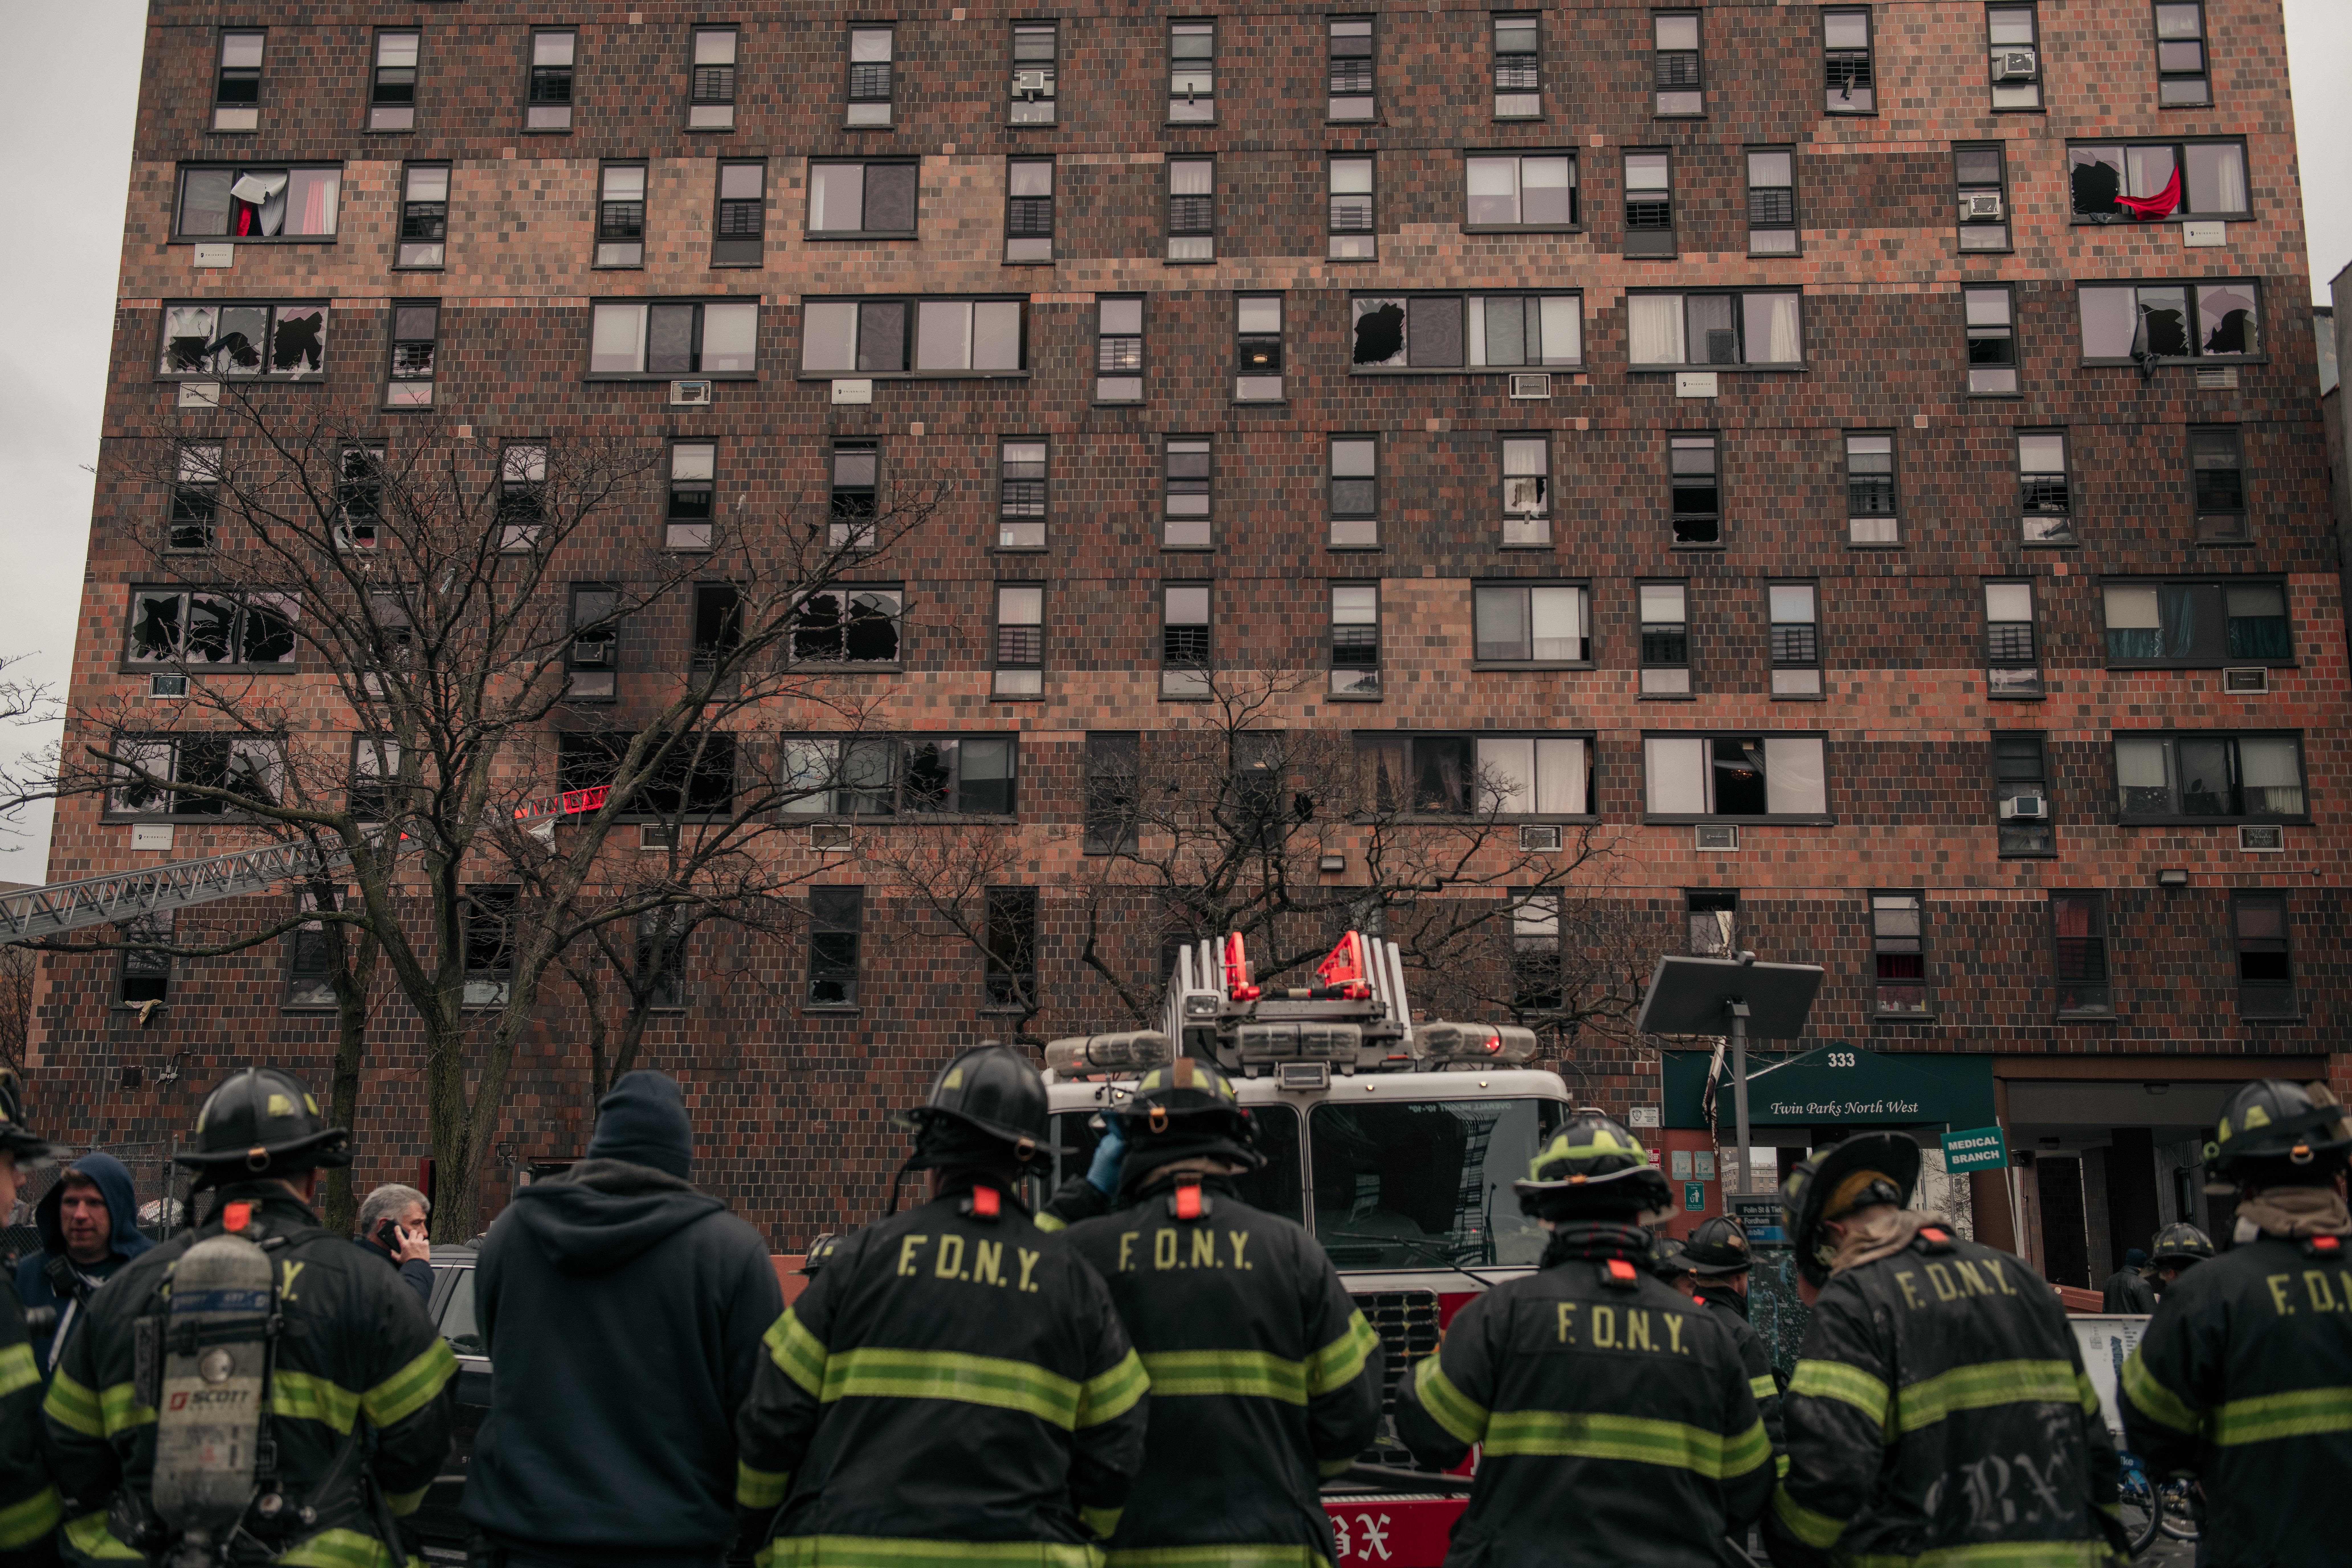 Emergency first responders remain at the scene after an intense fire at a 19-story residential building that erupted in the morning on January 9, 2022 in the Bronx borough of New York City. 